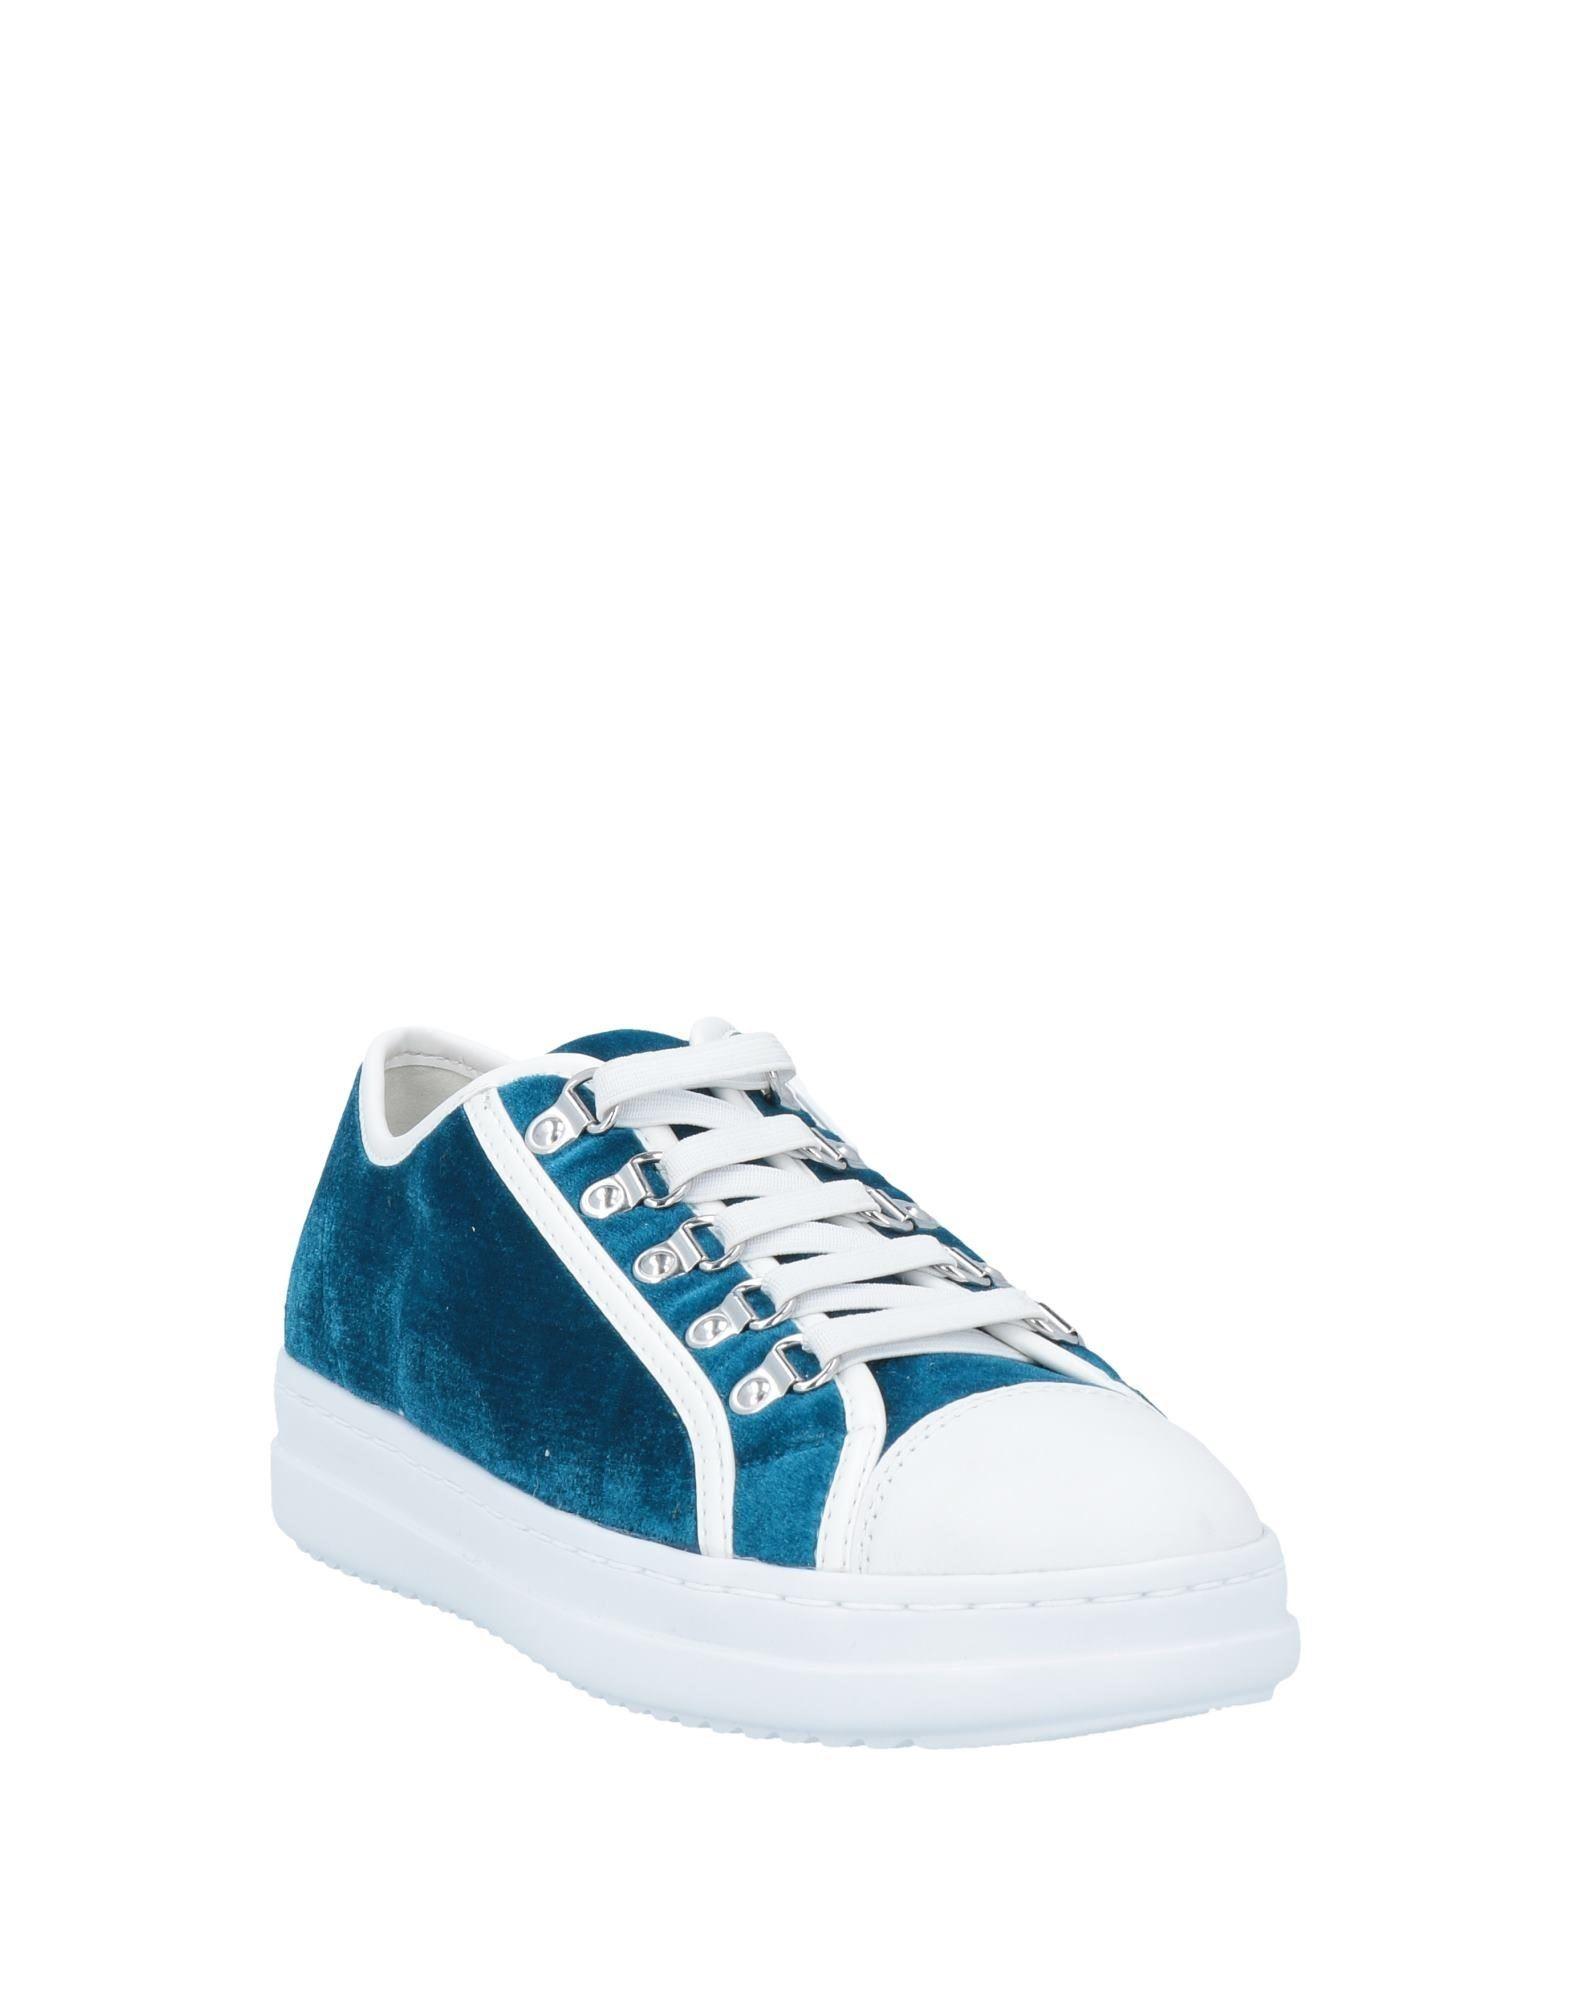 Geox Velvet Trainers in Turquoise (Blue) | Lyst